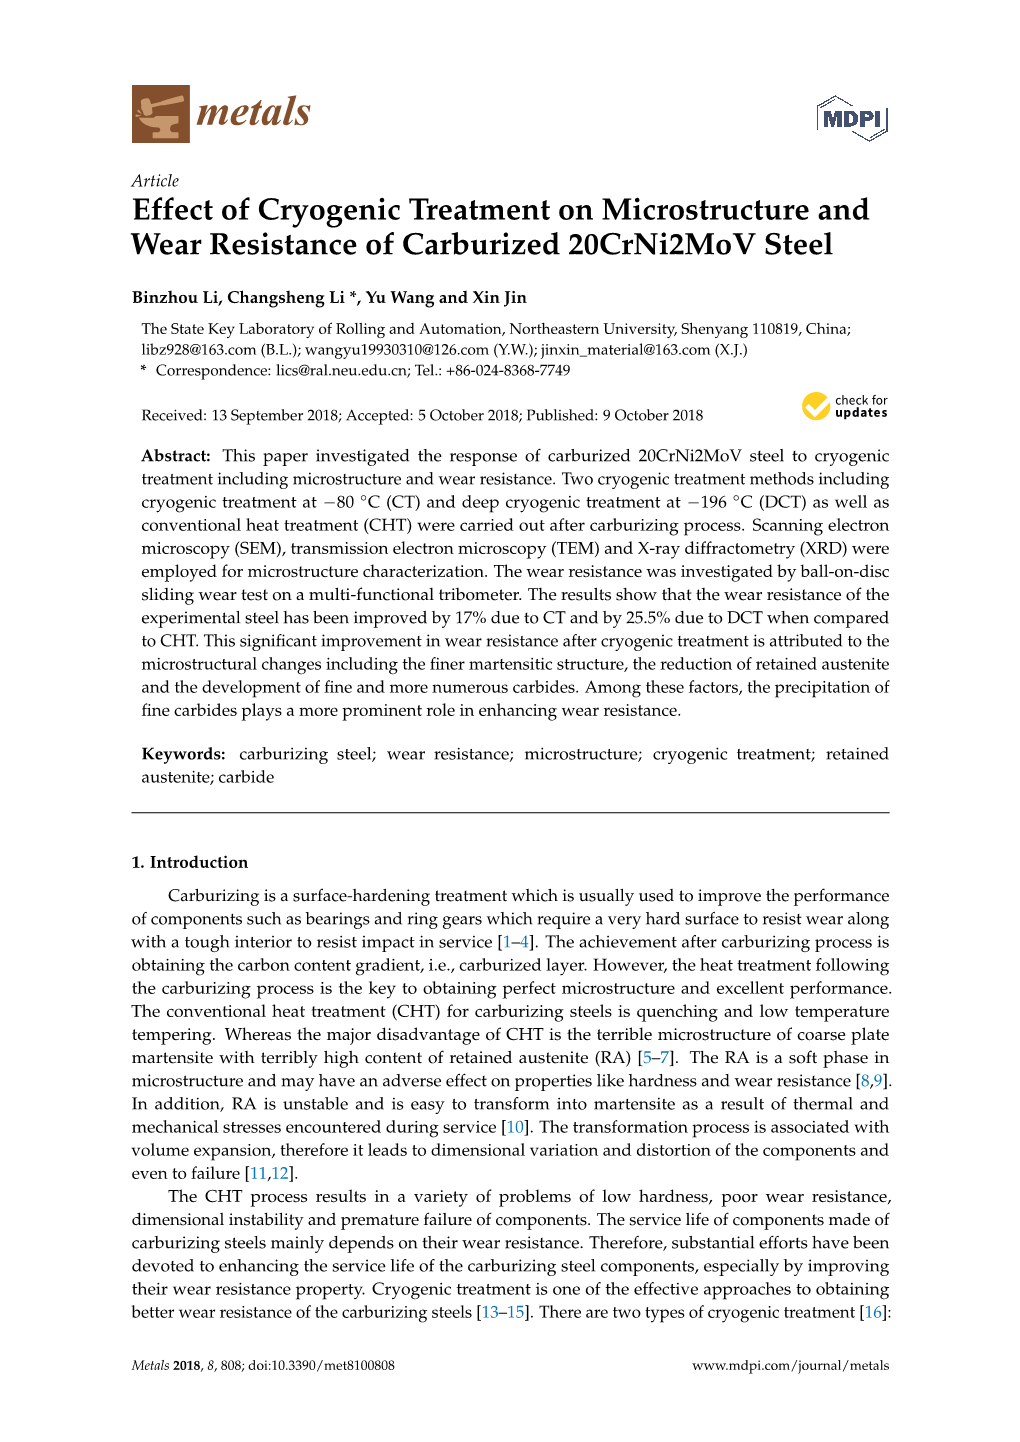 Effect of Cryogenic Treatment on Microstructure and Wear Resistance of Carburized 20Crni2mov Steel